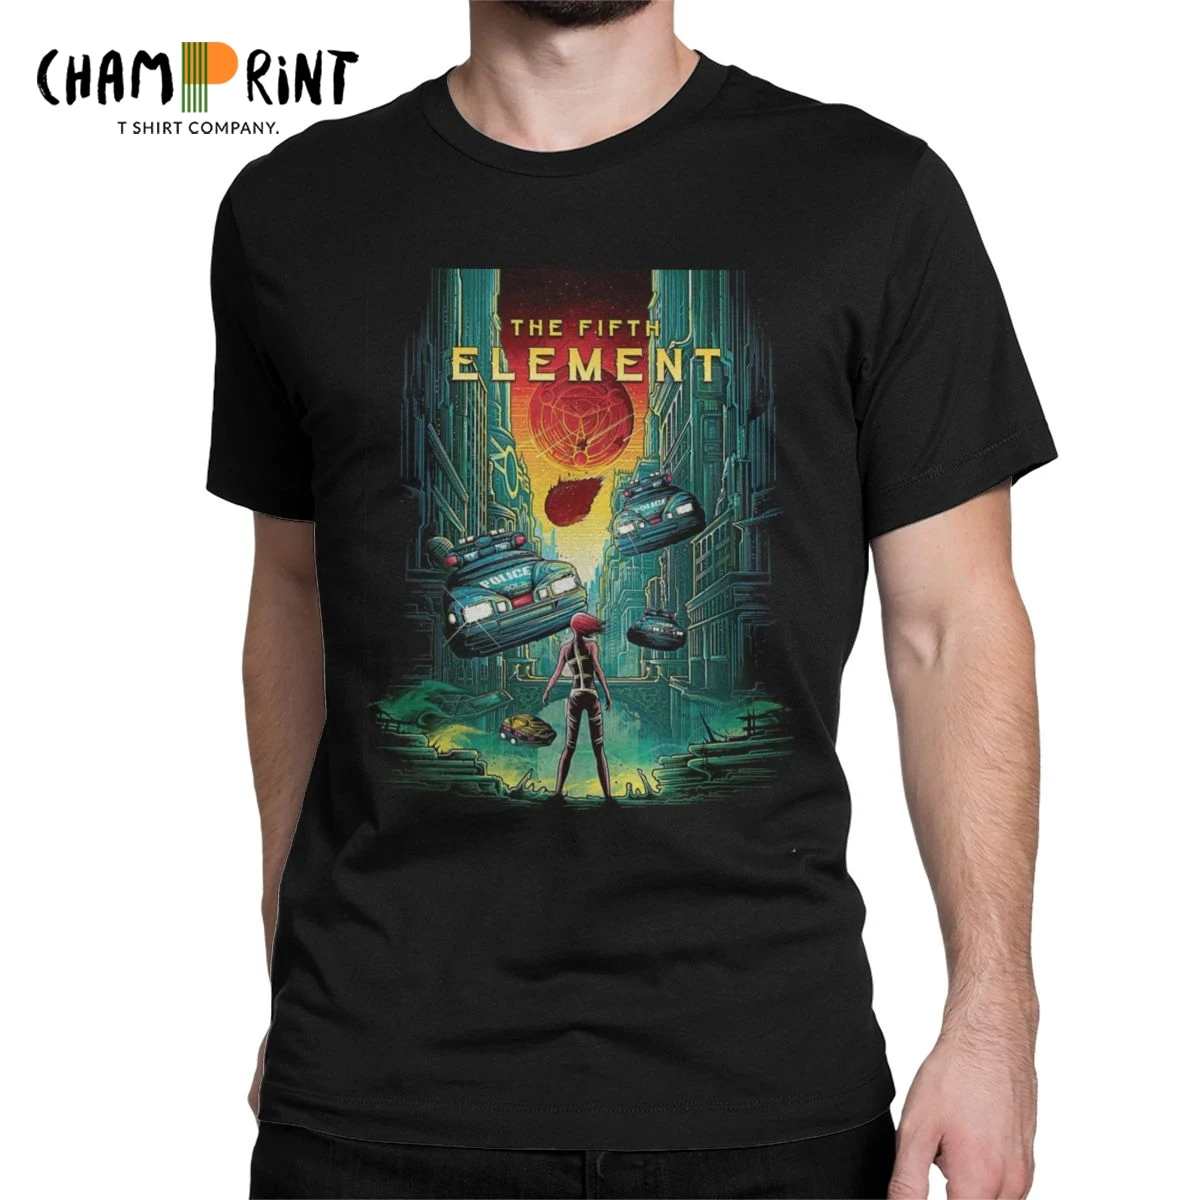 Cool The Fifth Element Hip Hop T-Shirts Men Round Neck Cotton T Shirt Bruce Willis Sci Fi movie Tee Shirt Plus Size Clothing